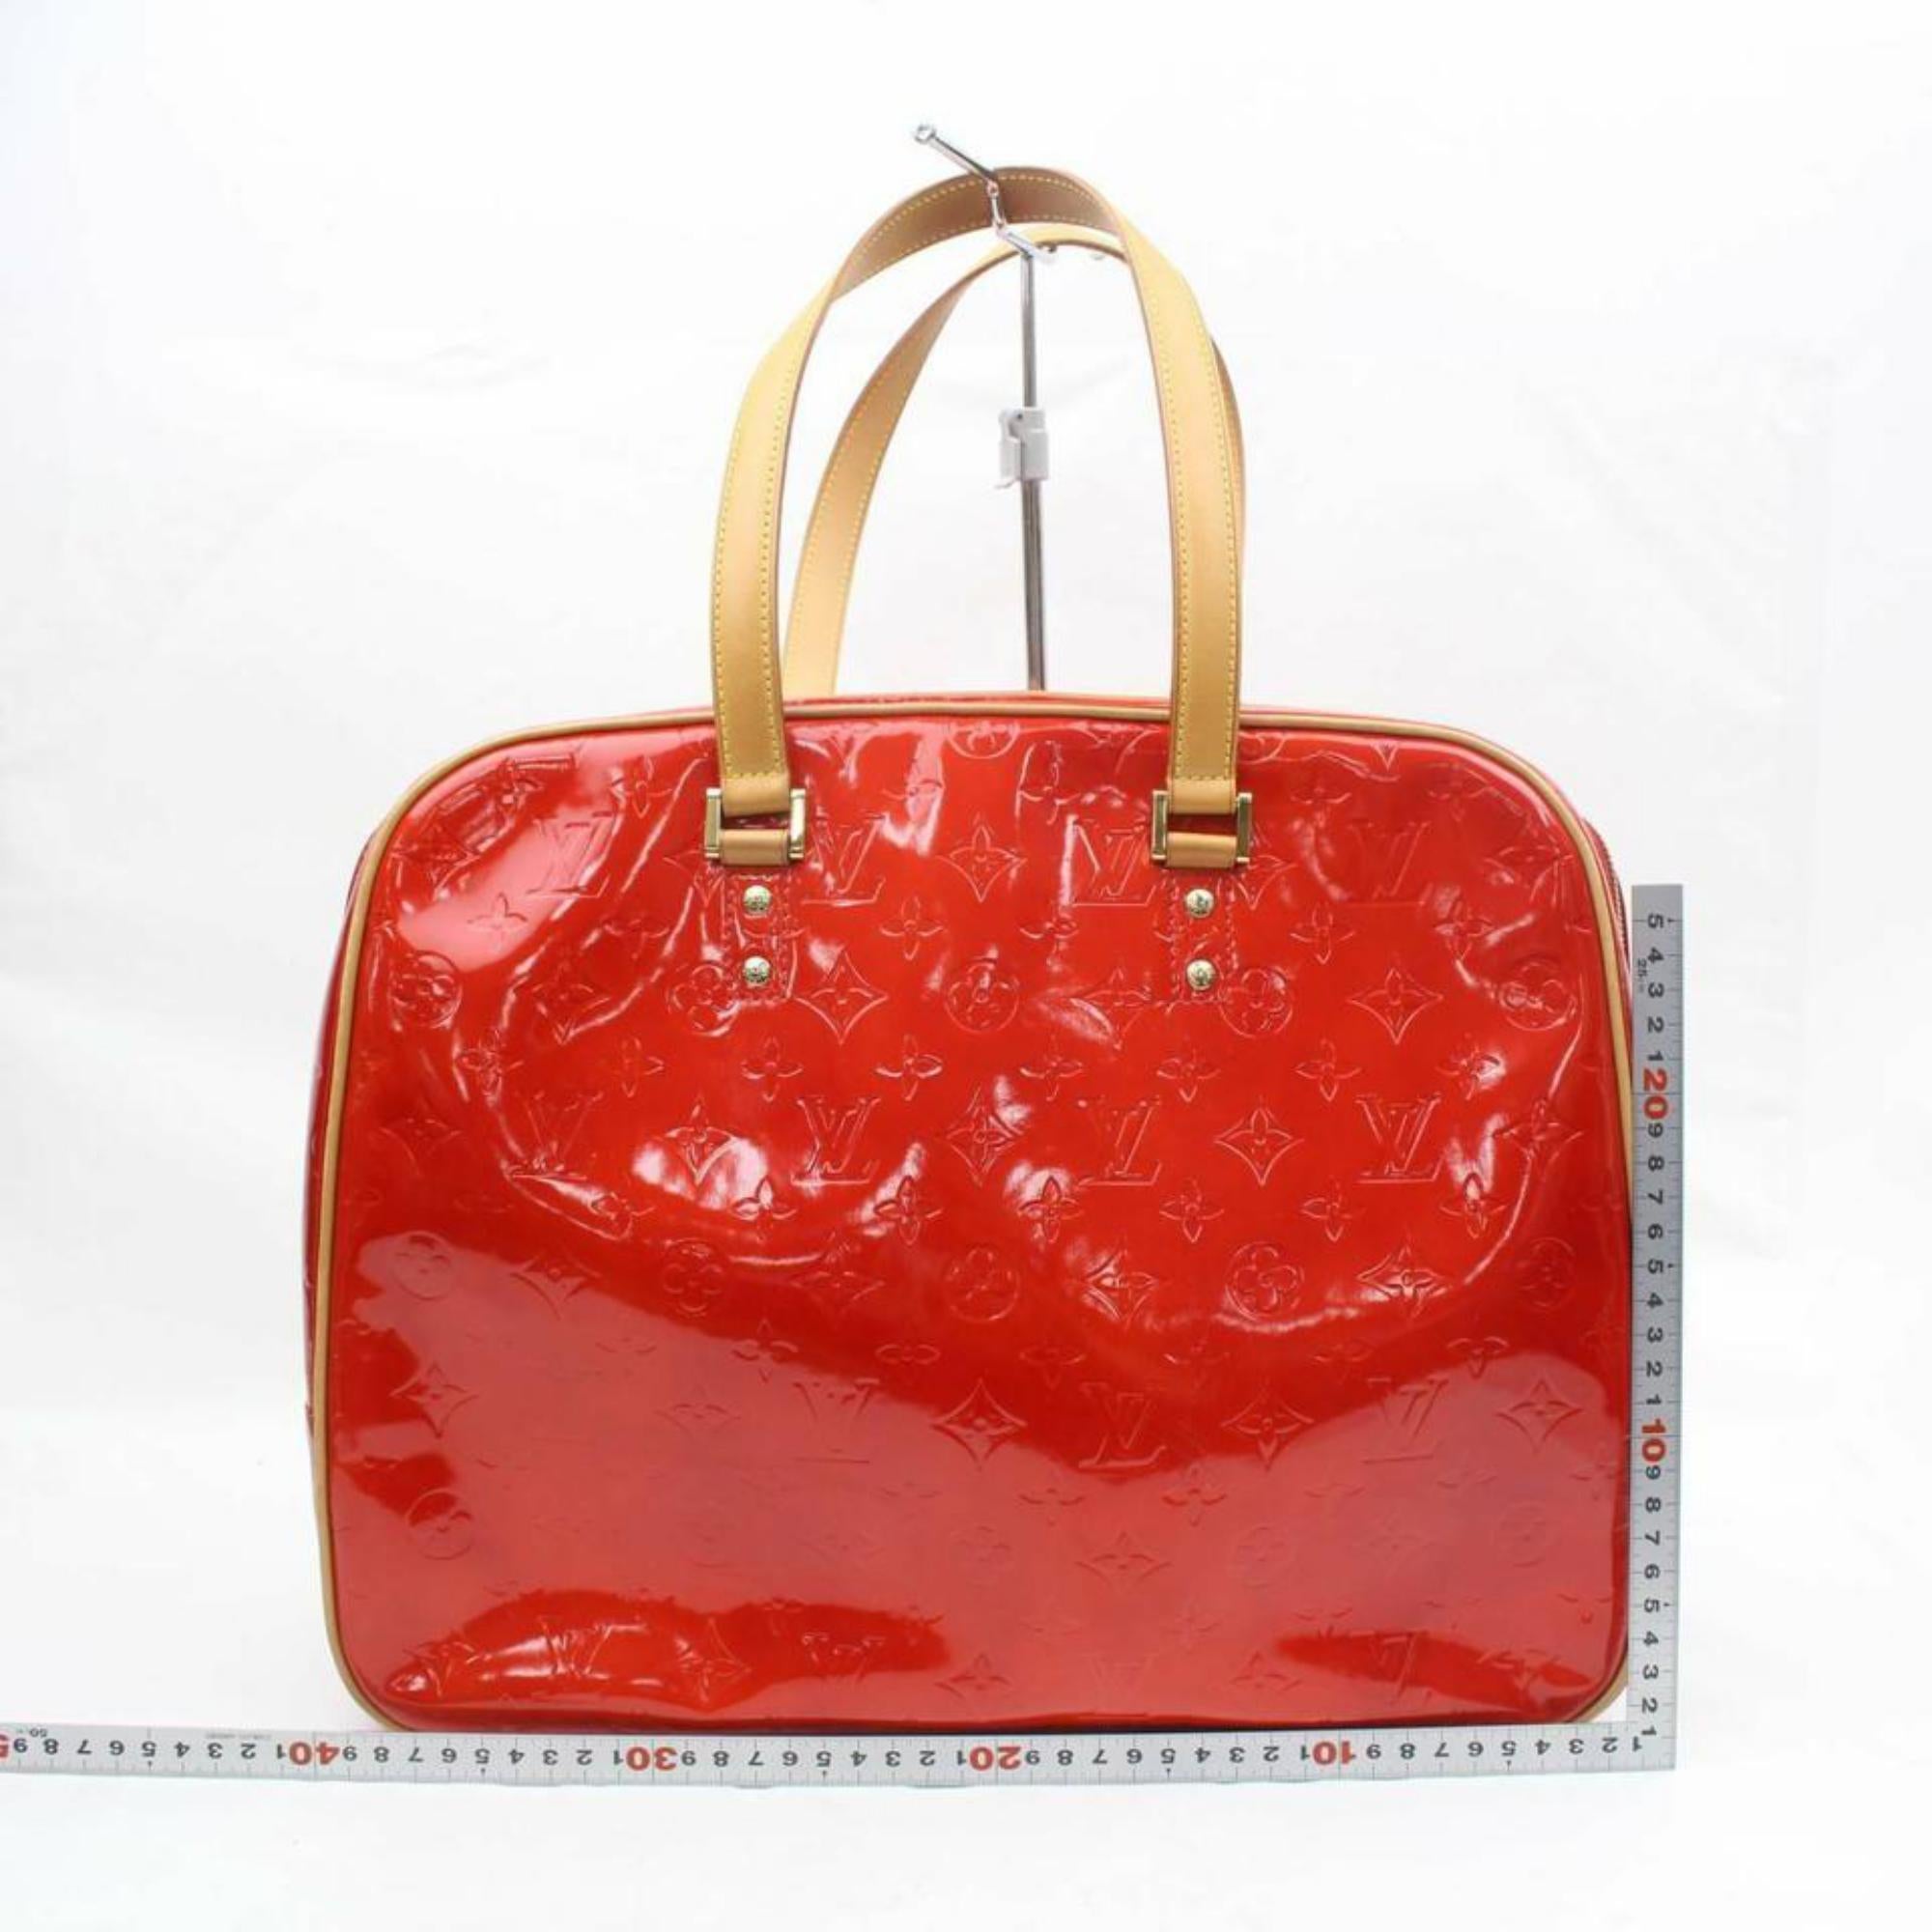 Louis Vuitton Vernis Zip Tote 870301 Red Patent Leather Weekend/Travel BAG In Excellent Condition For Sale In Forest Hills, NY